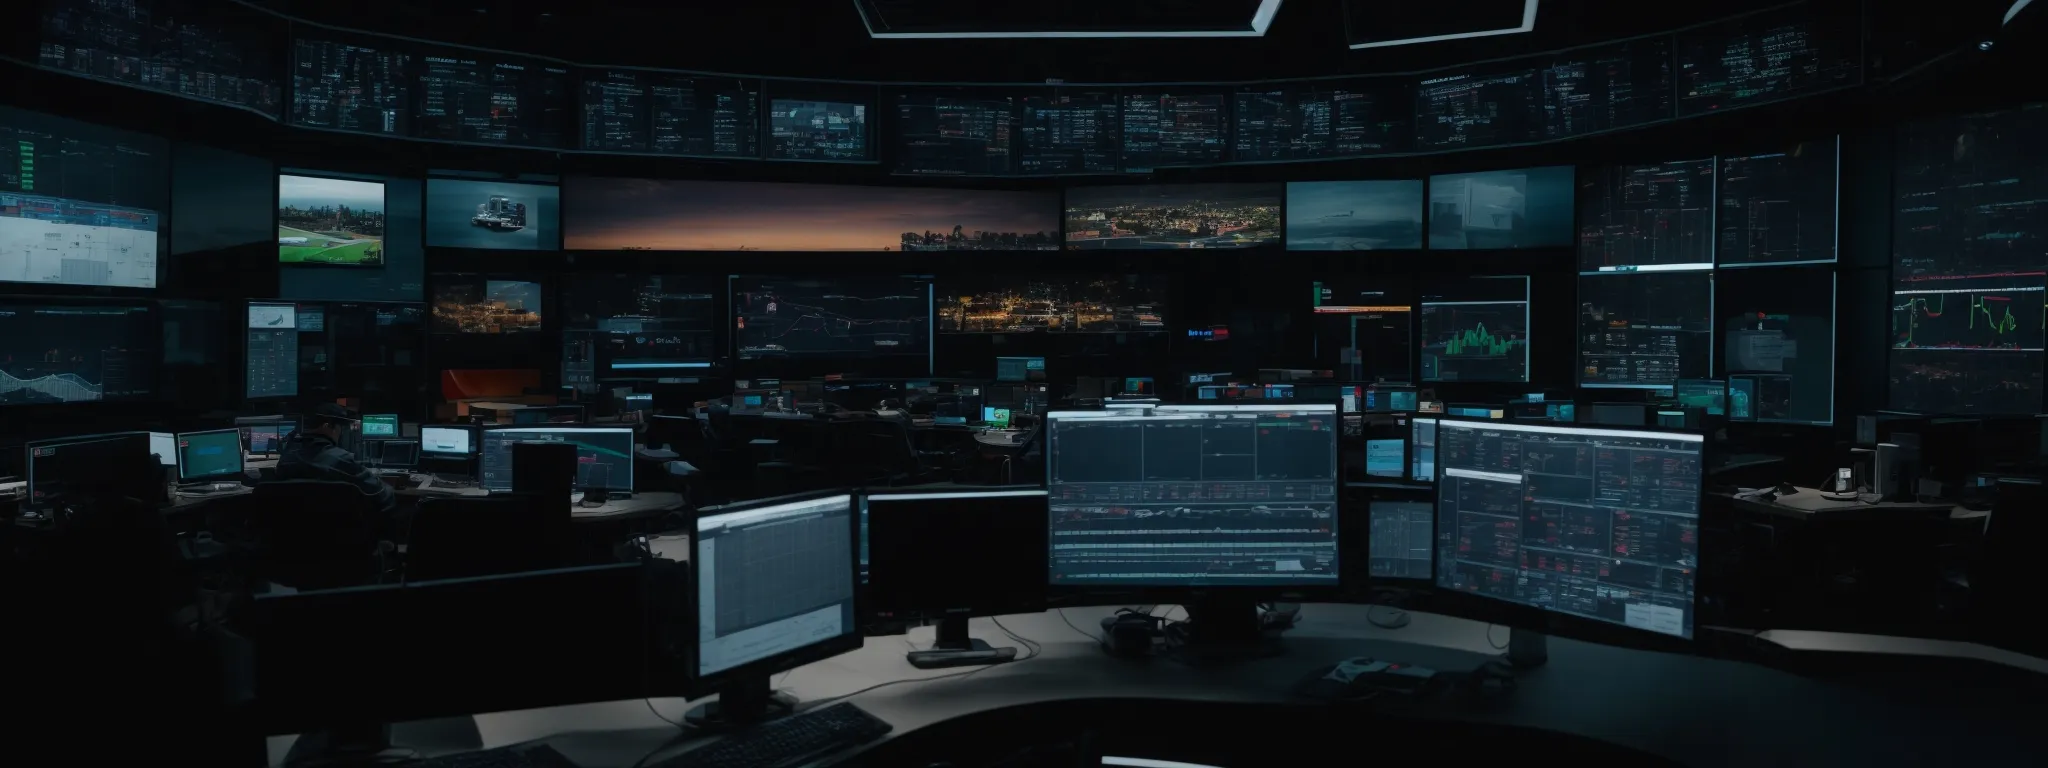 a screen-filled control center with an individual overseeing multiple live website analytics dashboards.